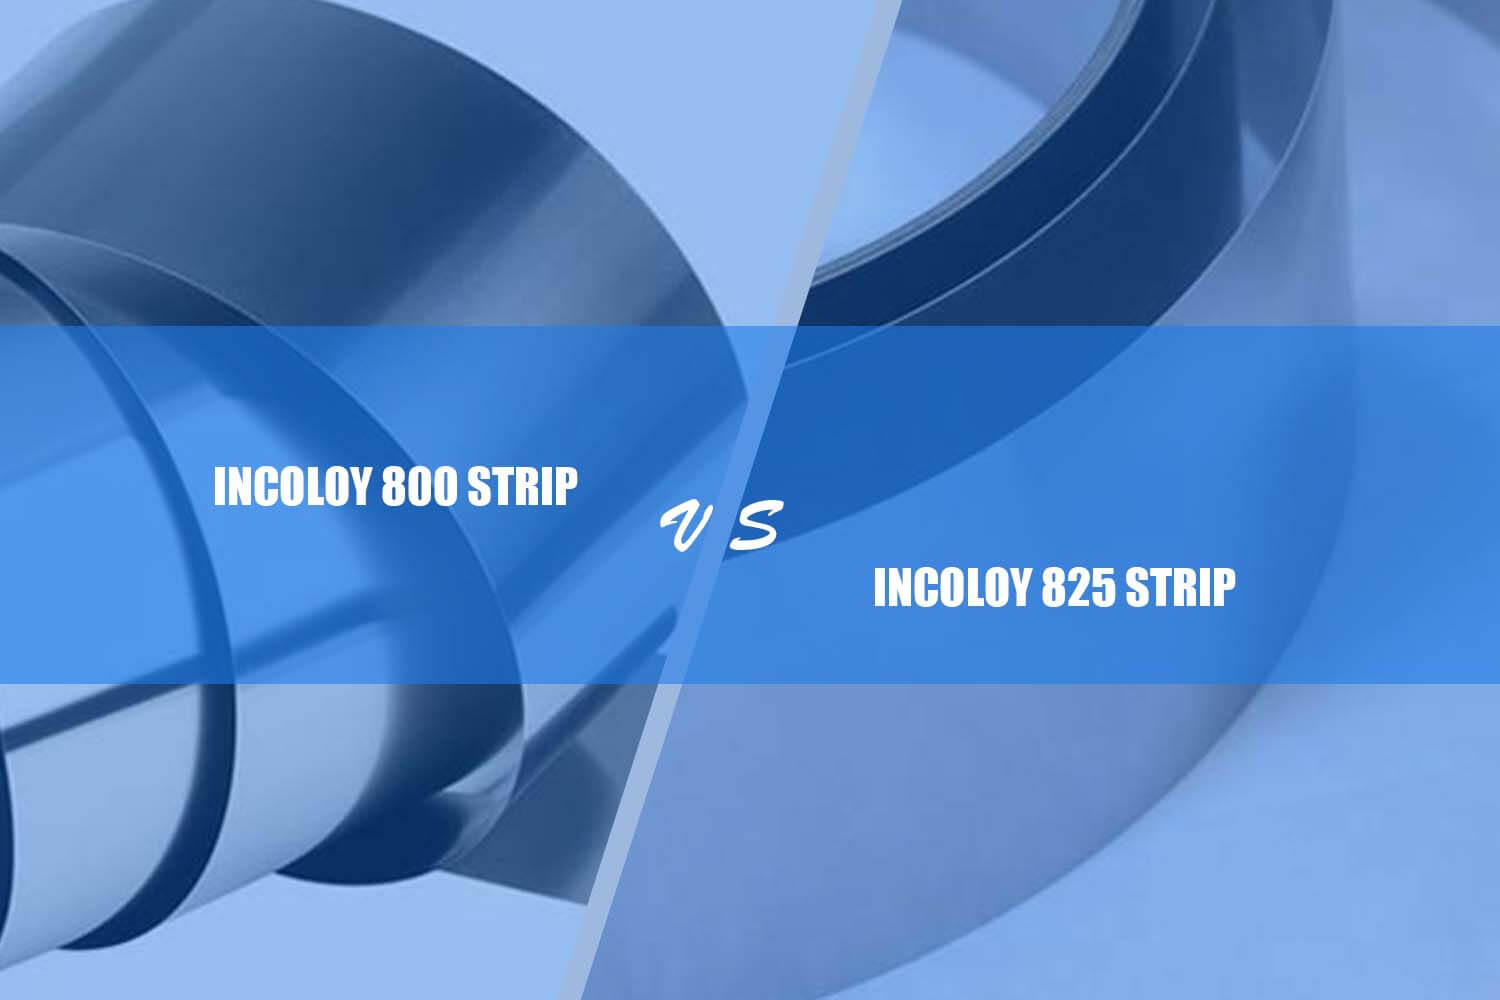 difference between incoloy 800 strip and incoloy 825 traka